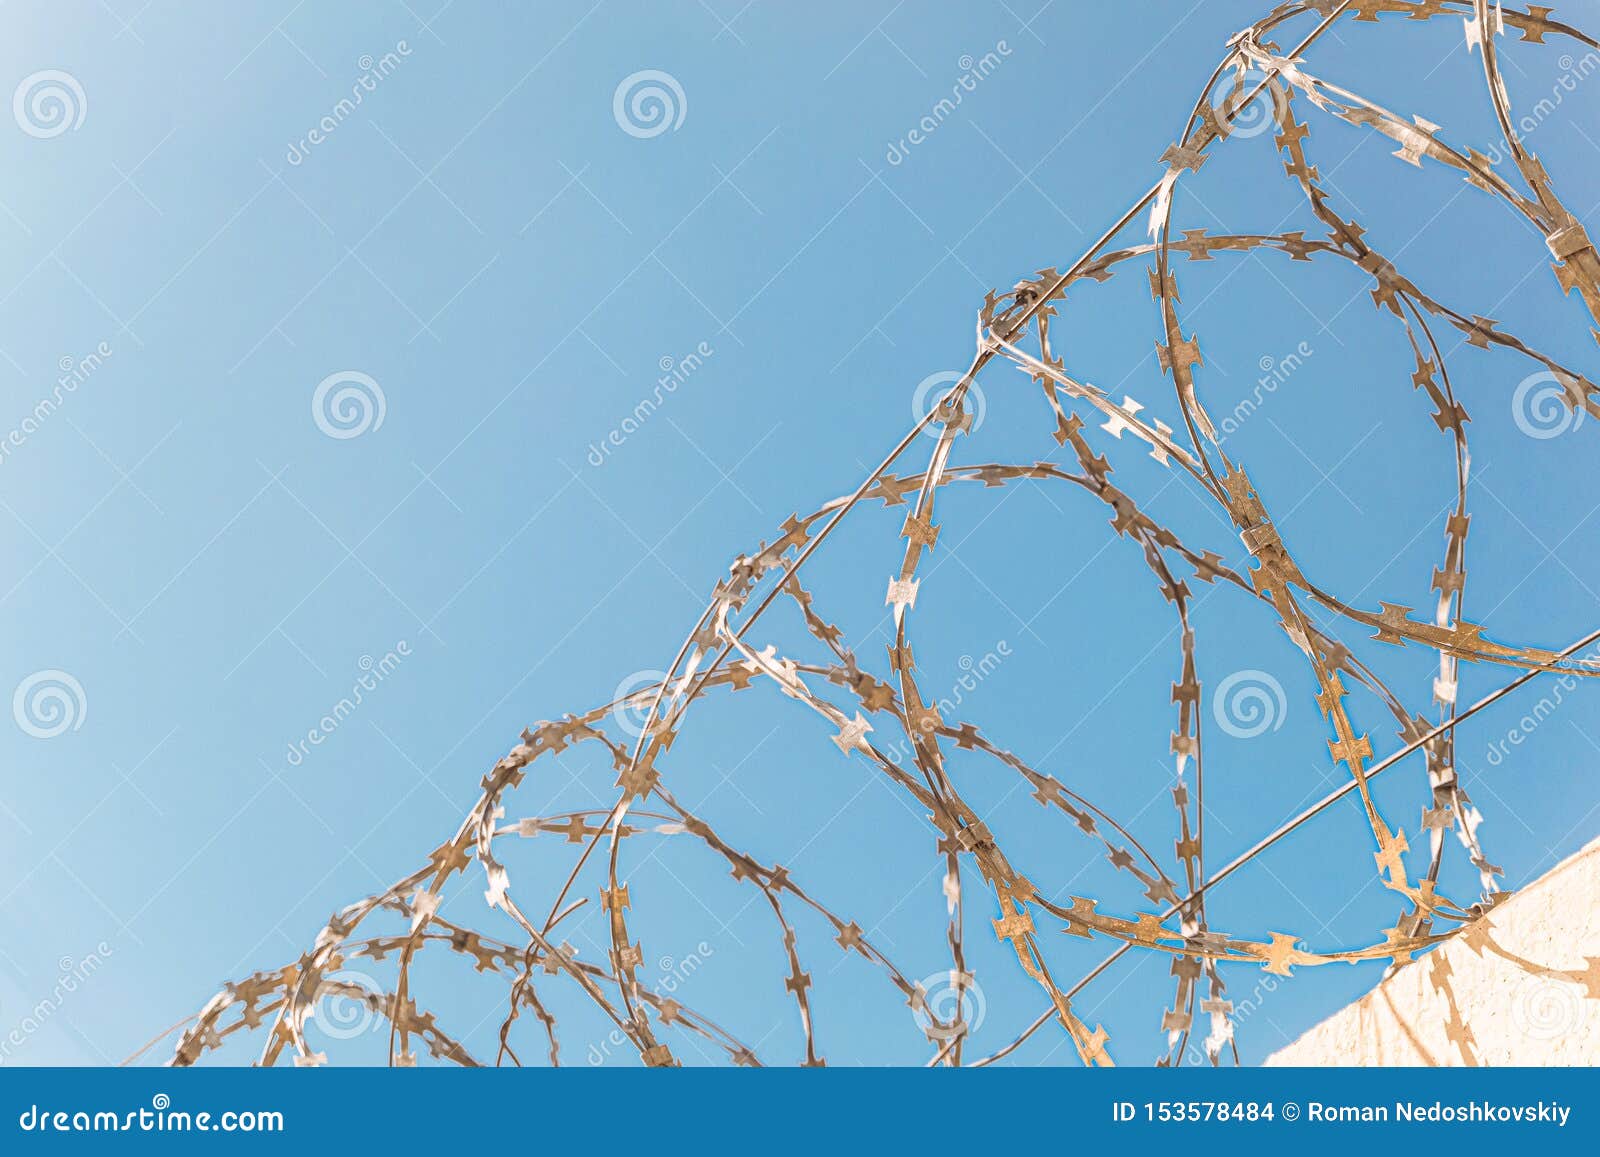 barbed wire on the fence close-up